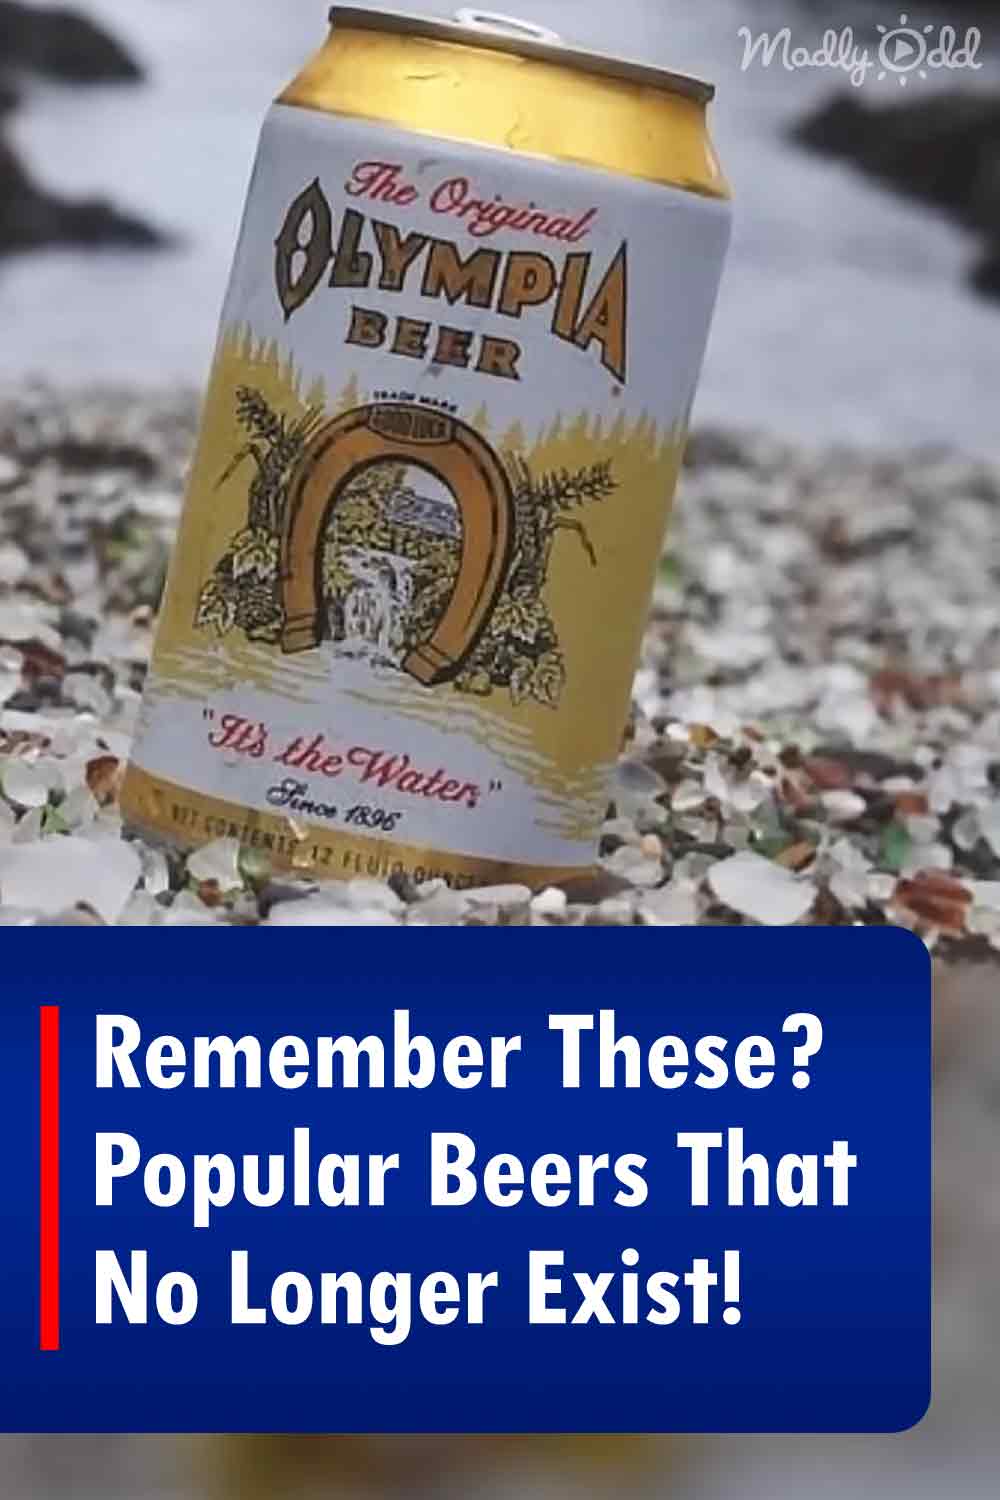 Remember These? Popular Beers That No Longer Exist!